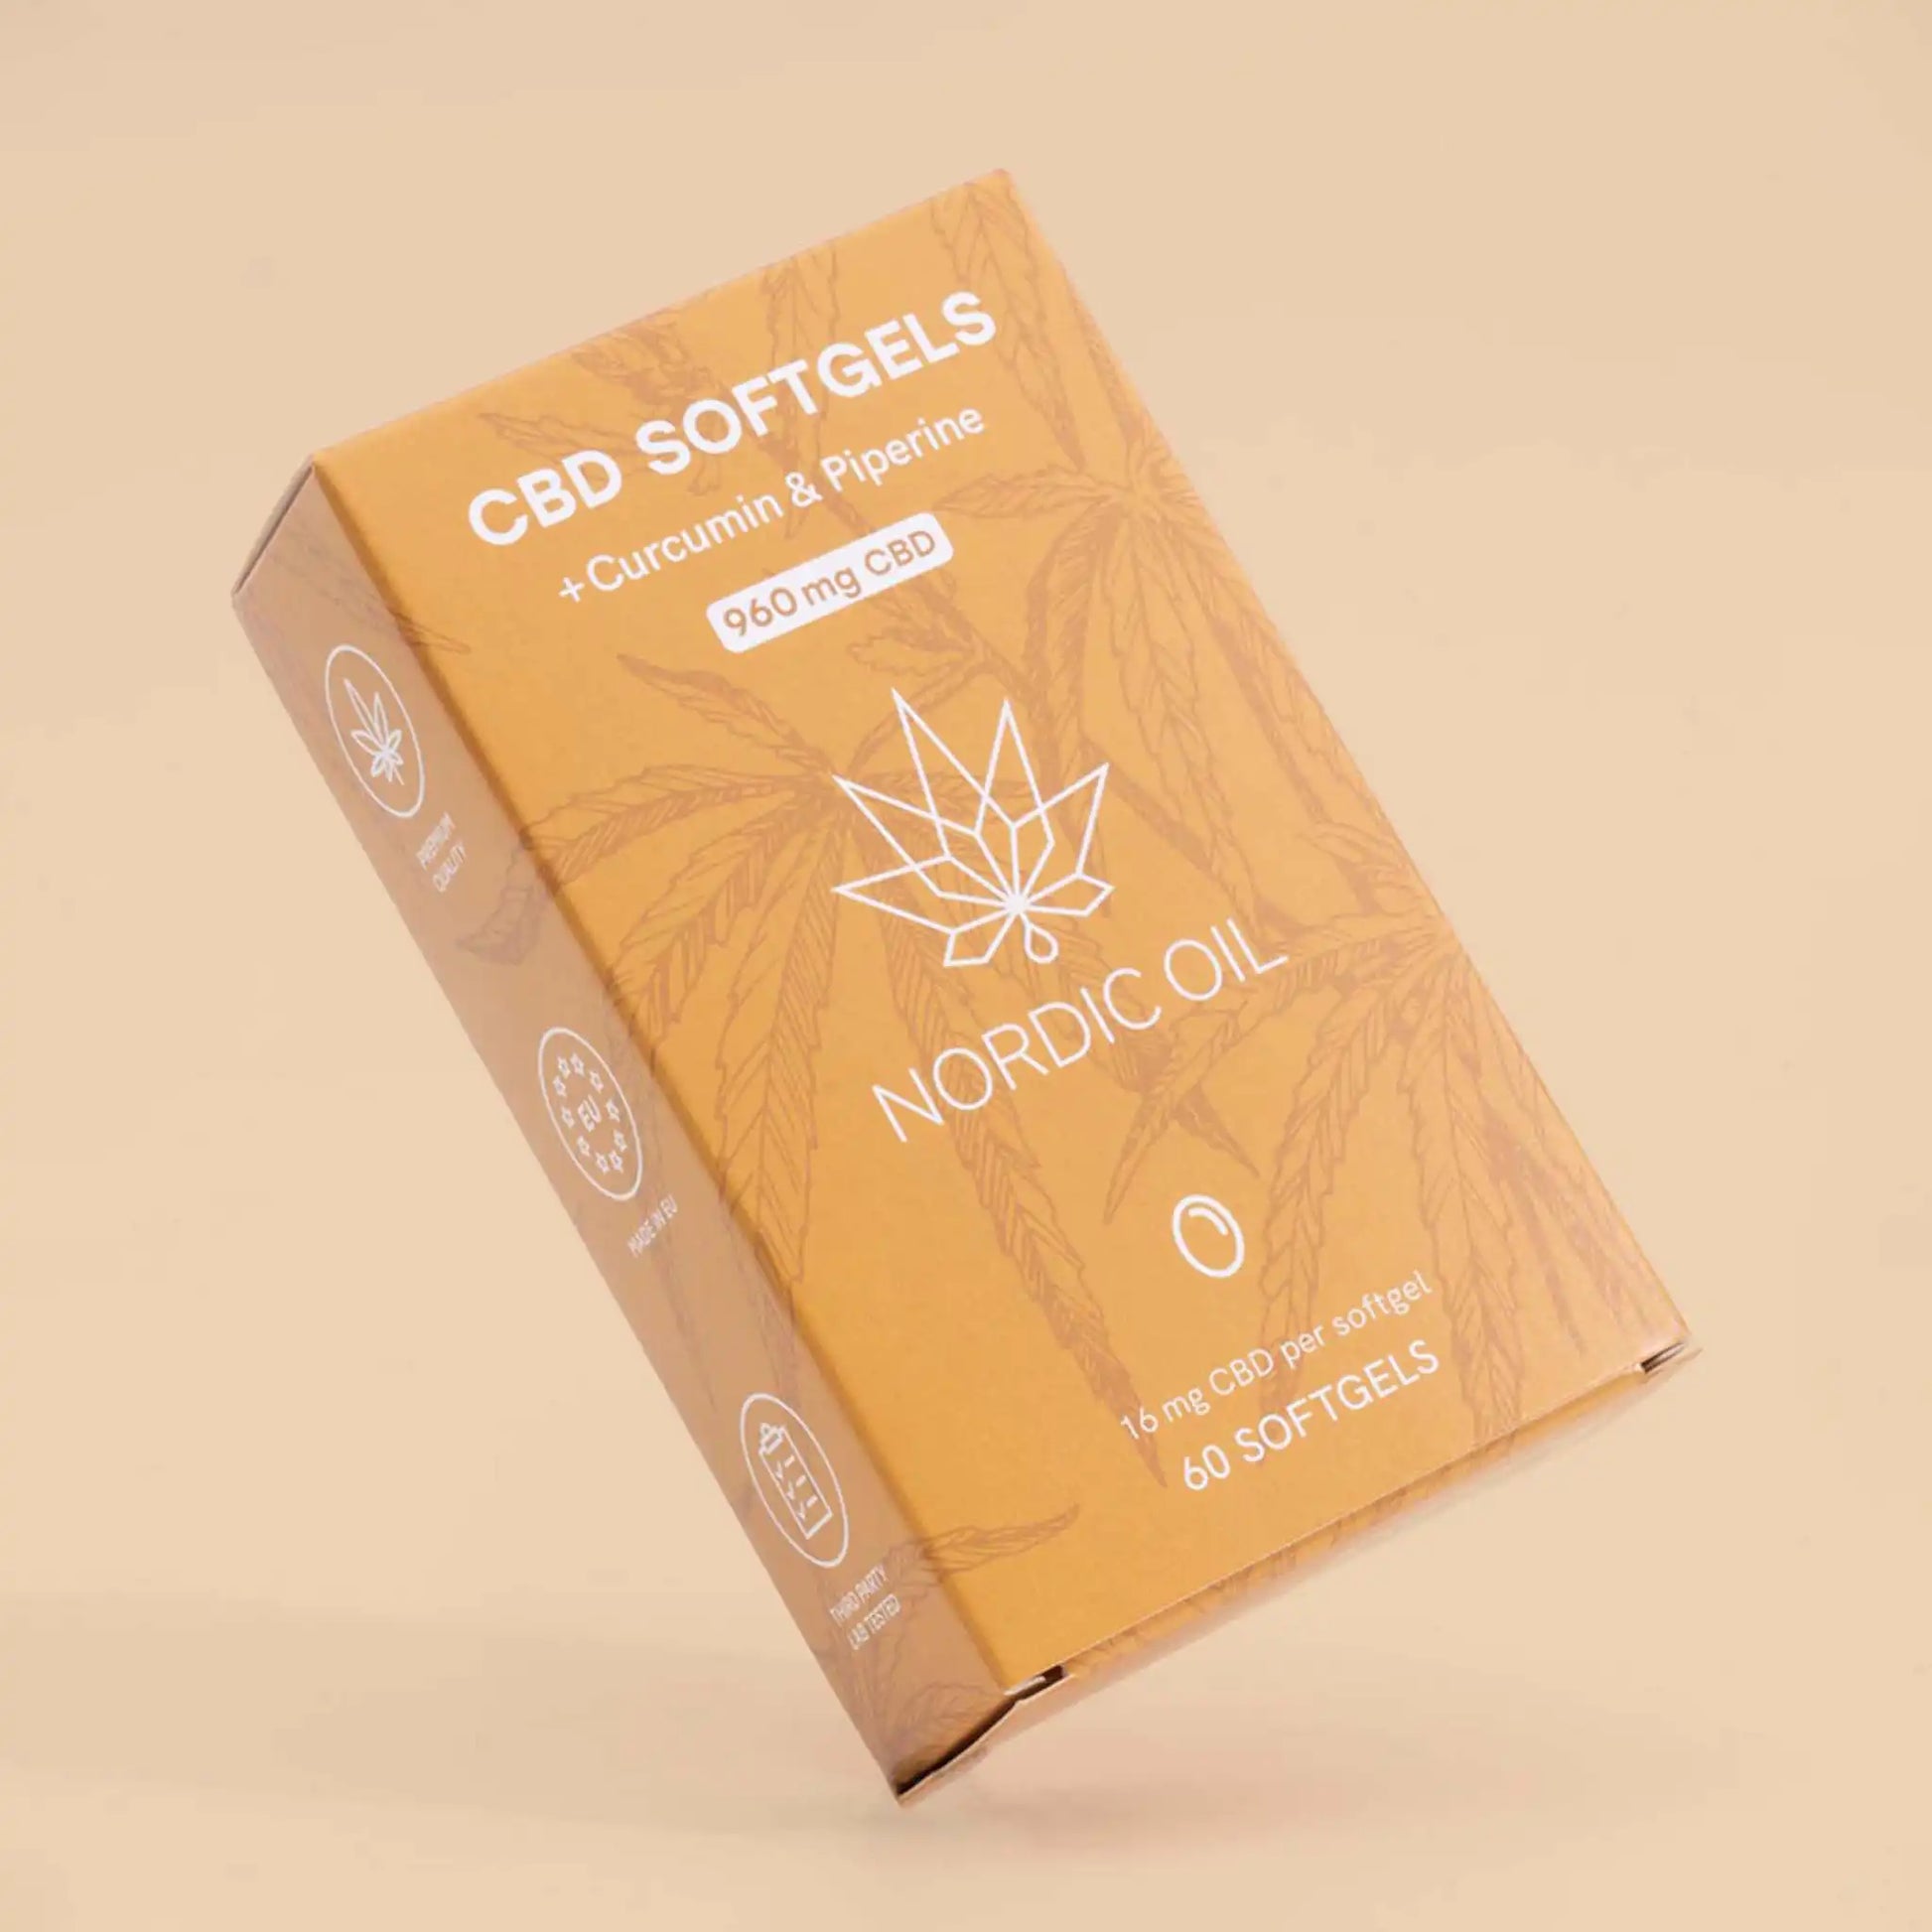 The package of CBD Capsules (960mg) with Curcumin is on the side in the border on an orange background.